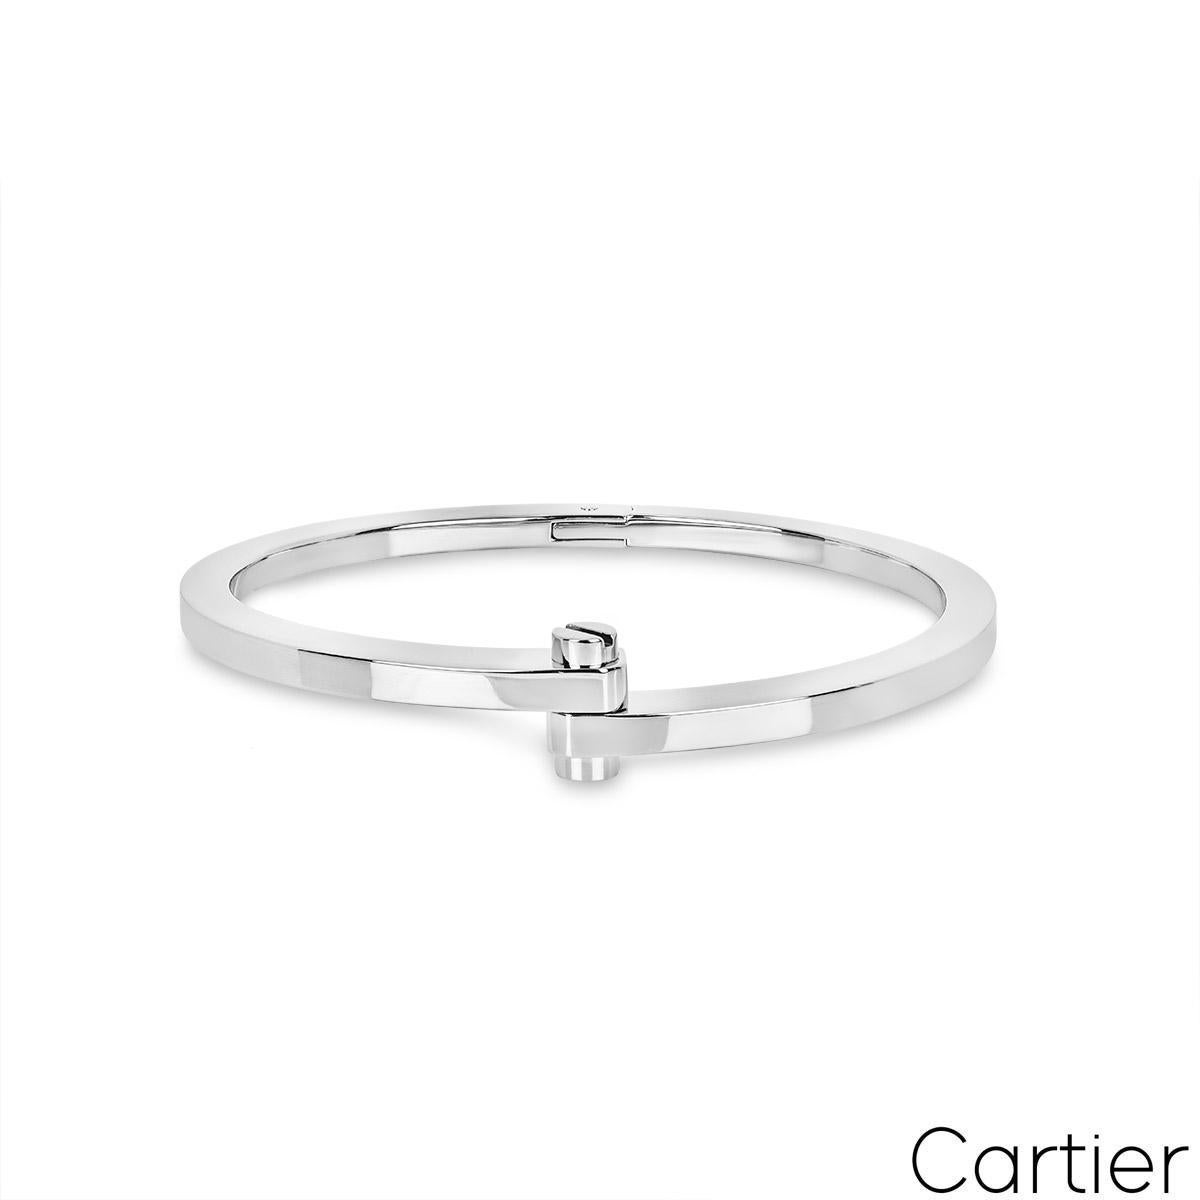 Cartier White Gold Menotte Bracelet In Excellent Condition For Sale In London, GB